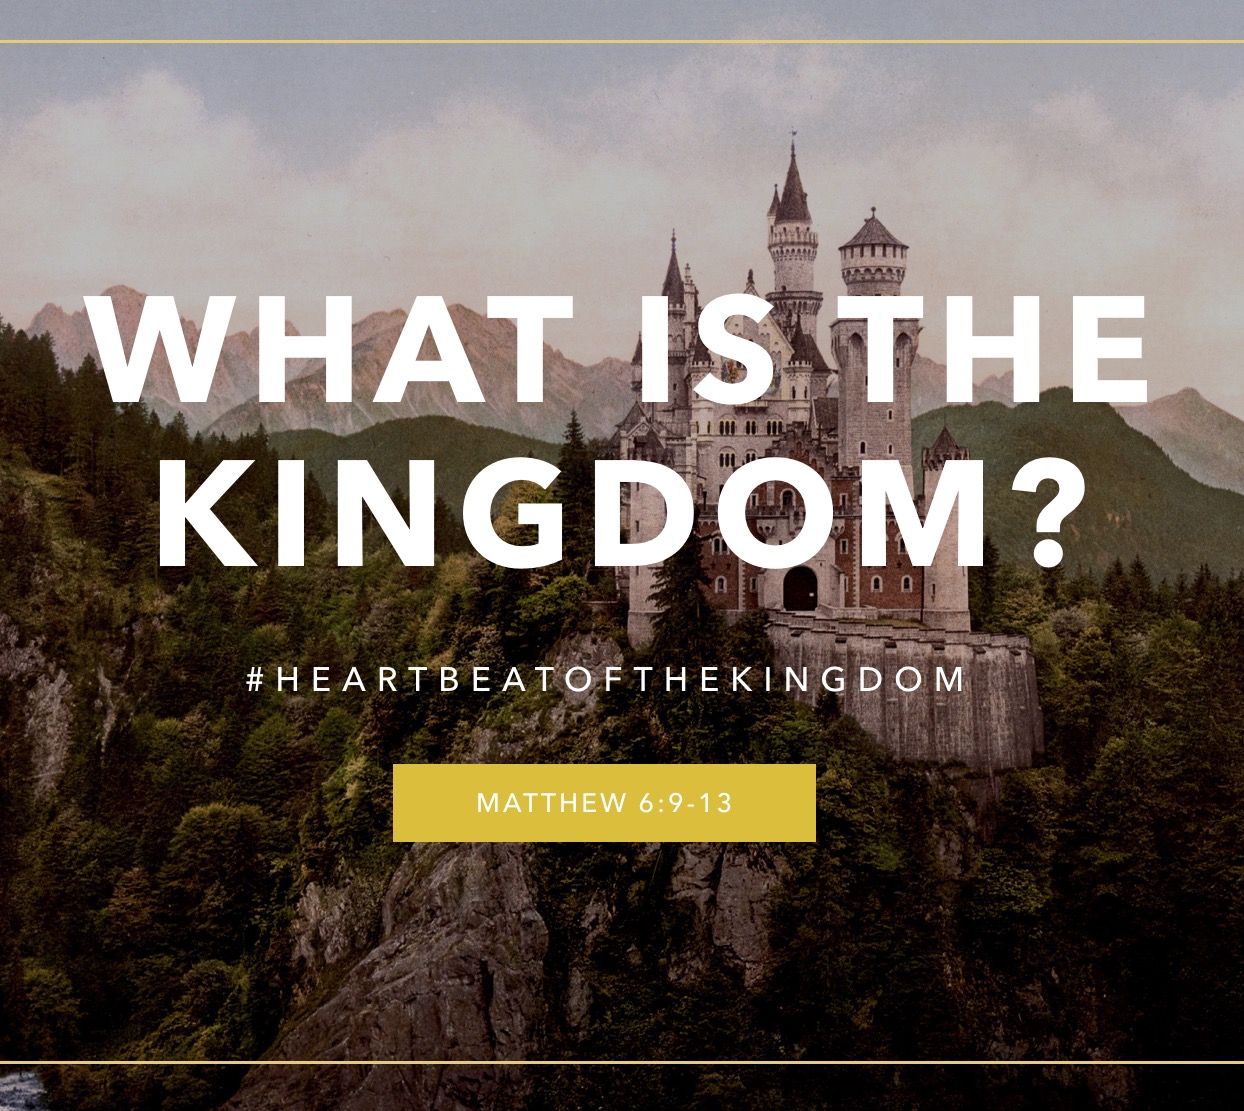 Heartbeat of the Kingdom - What Is The Kingdom?